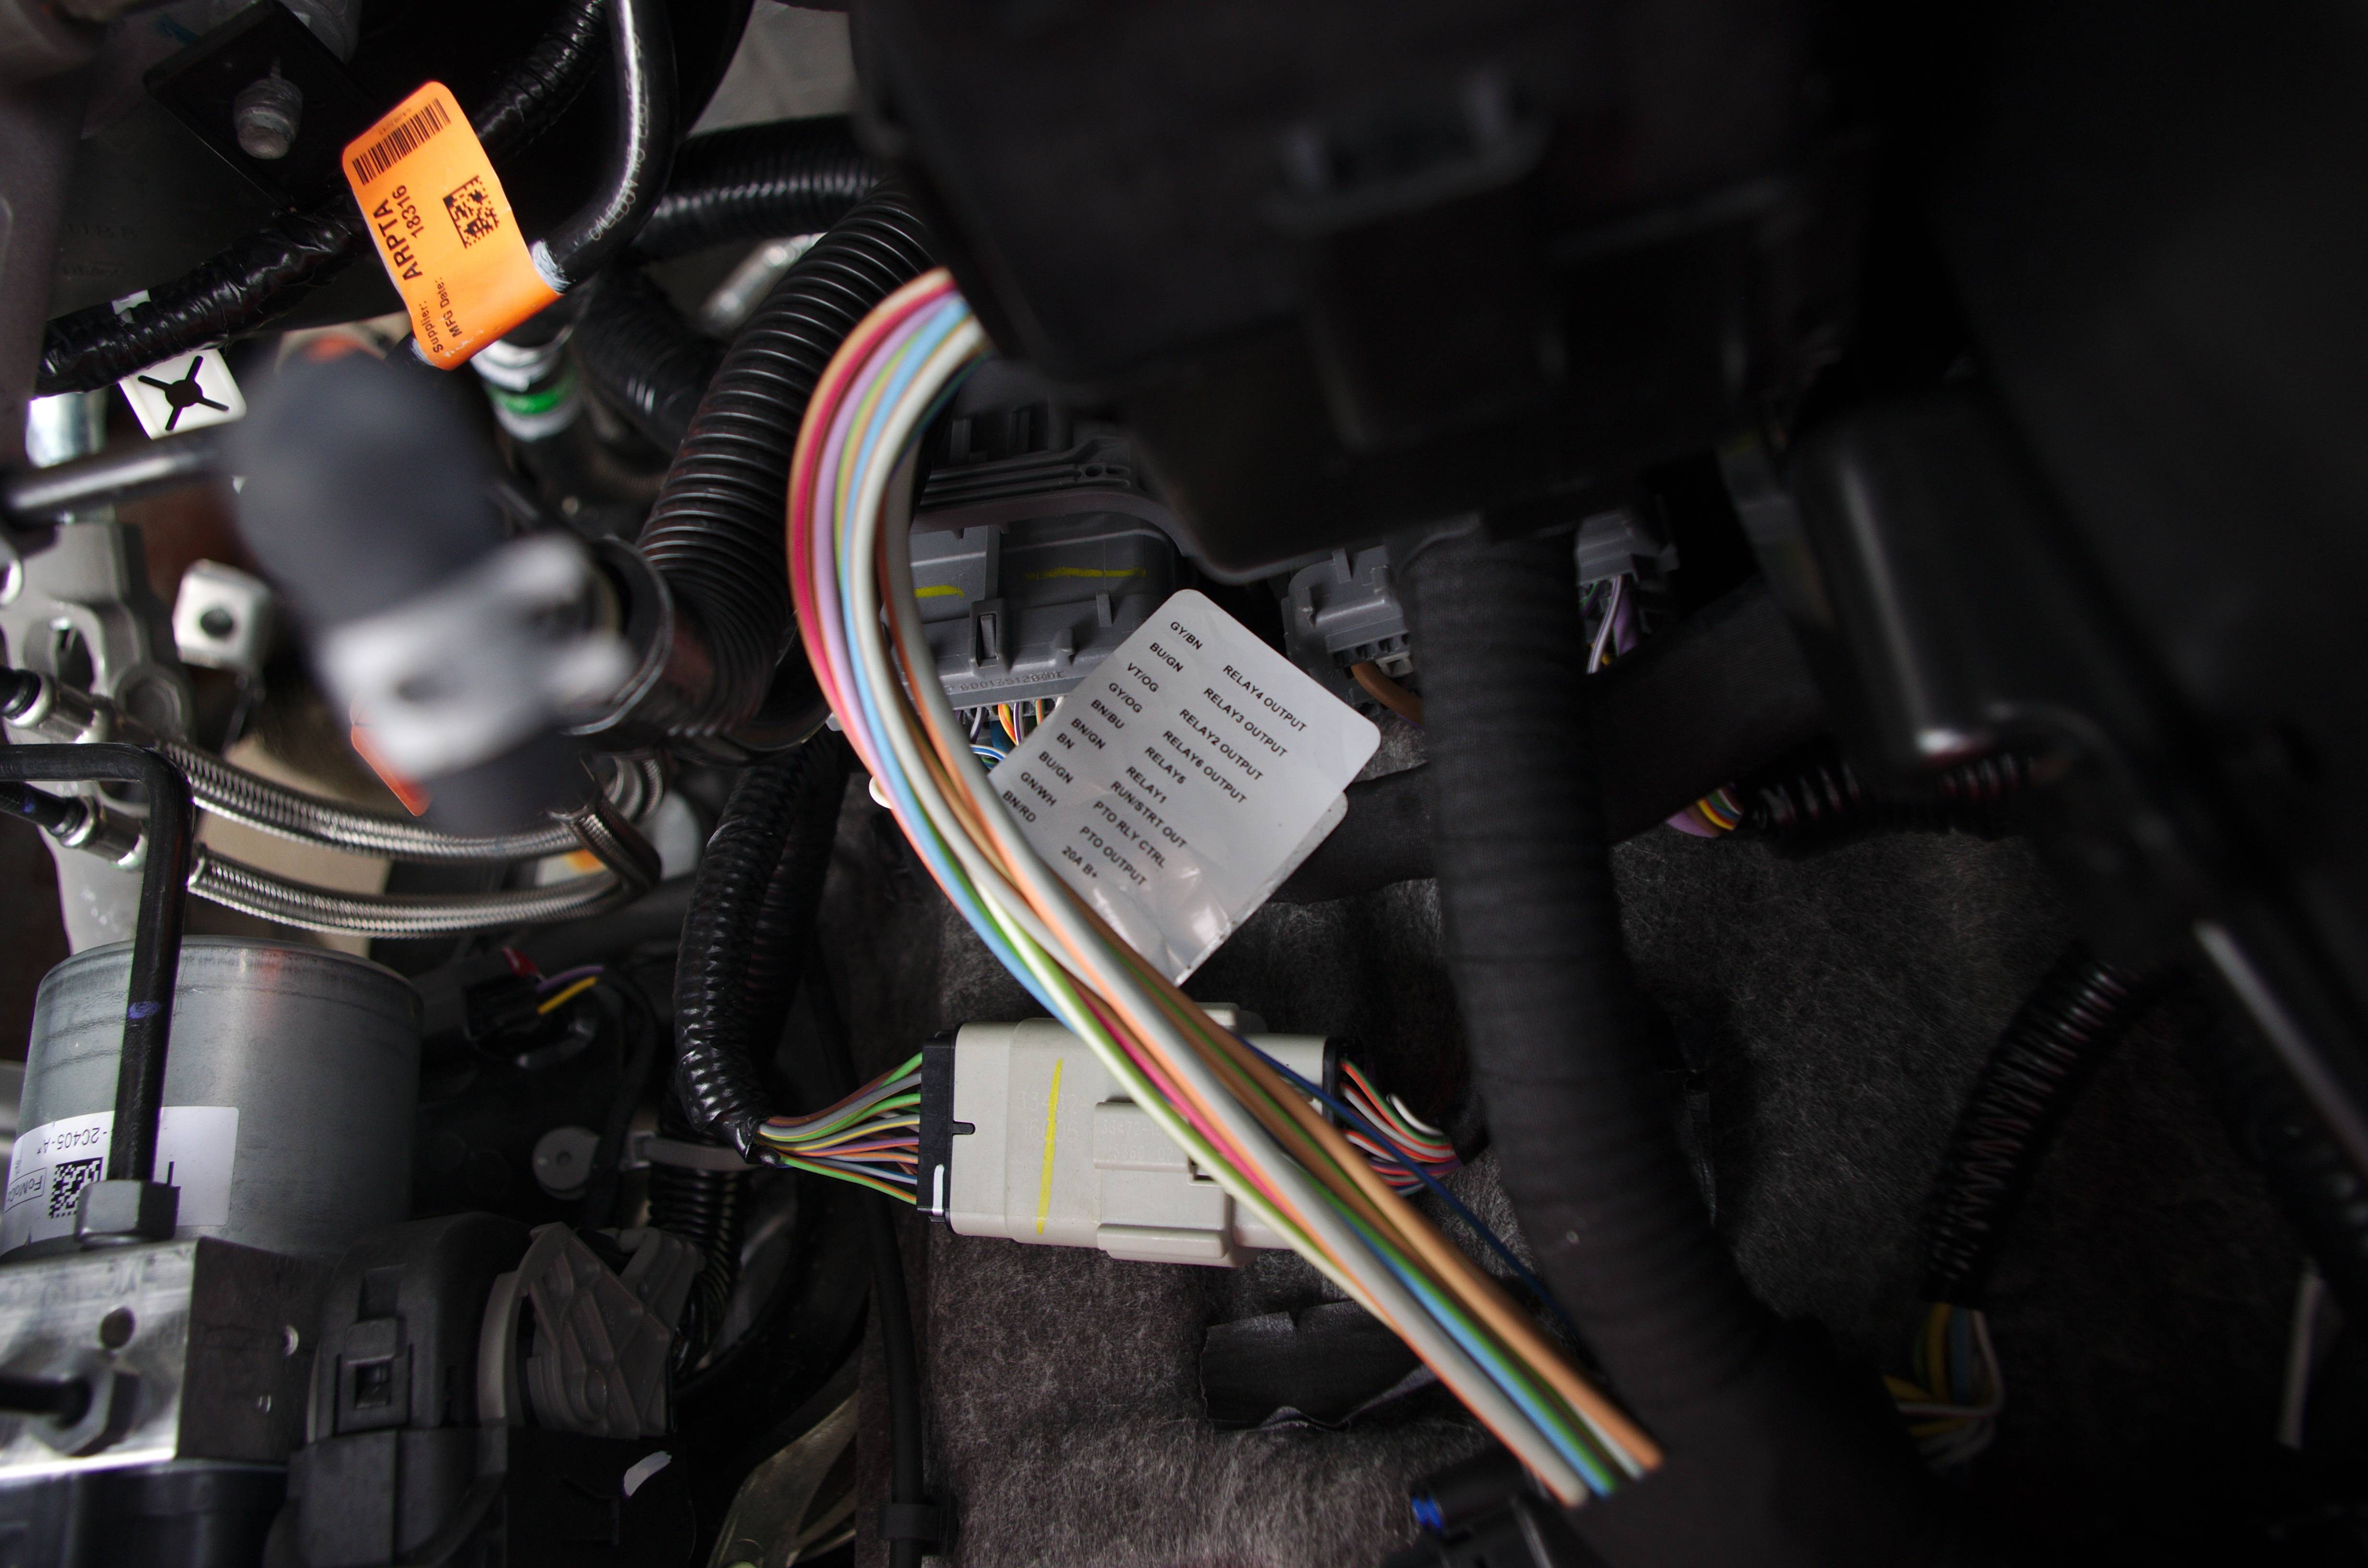 Ford Upfitter Switch Wiring Diagram 2011 Upfitter Switch Power Wires ford Truck Enthusiasts forums Of Ford Upfitter Switch Wiring Diagram 2011